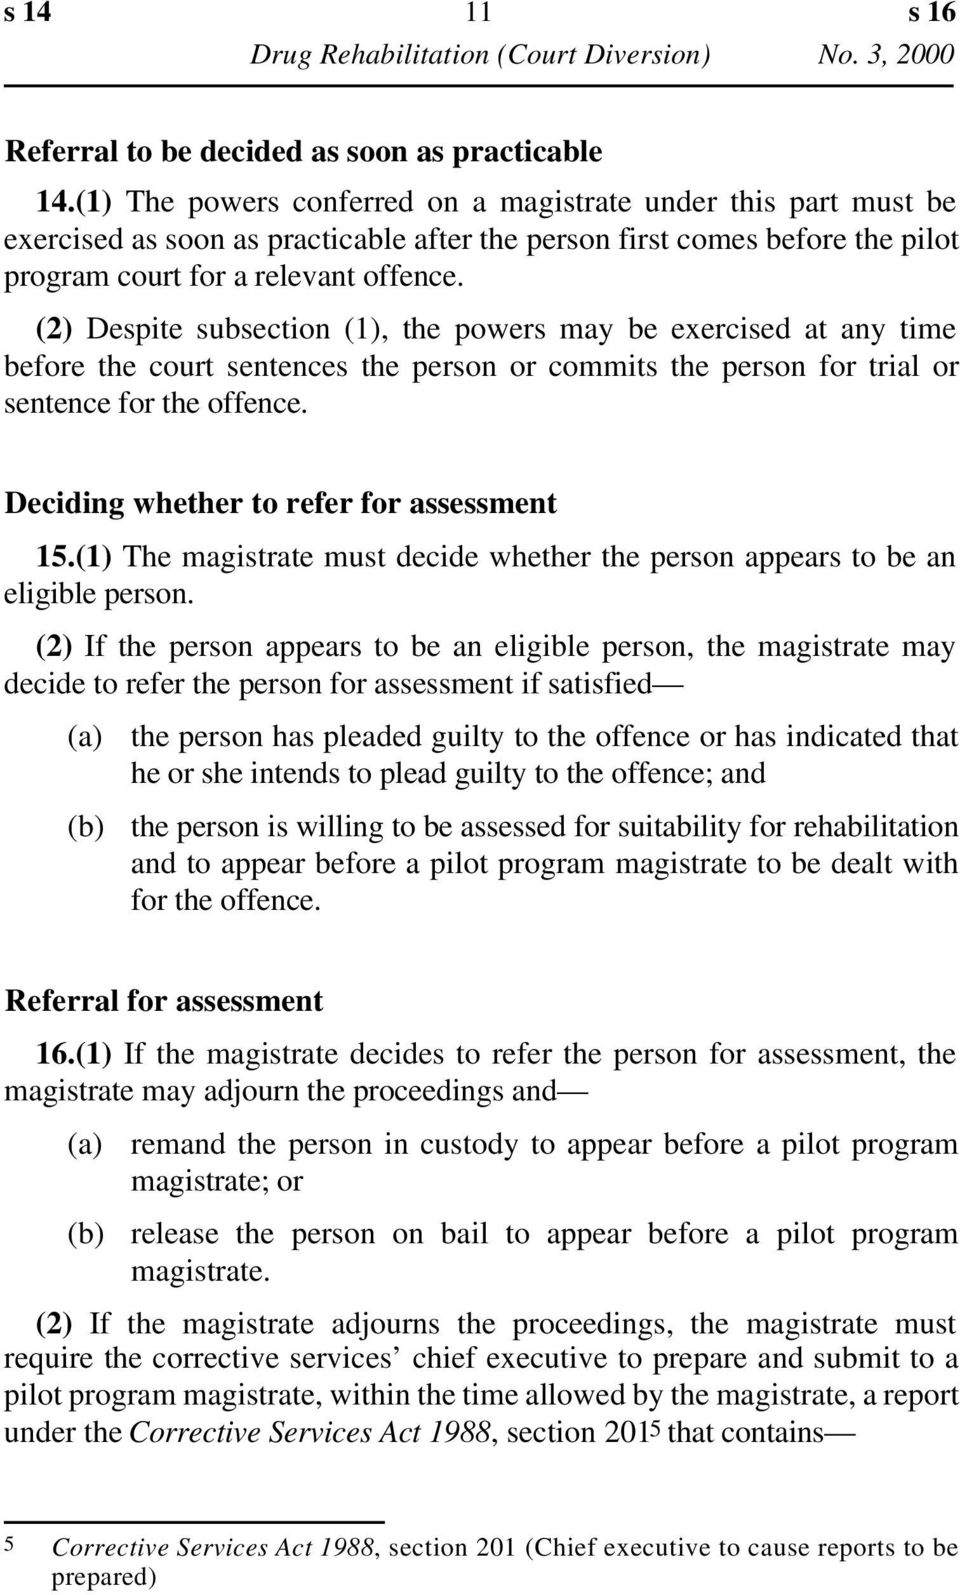 (2) Despite subsection (1), the powers may be exercised at any time before the court sentences the person or commits the person for trial or sentence for the offence.